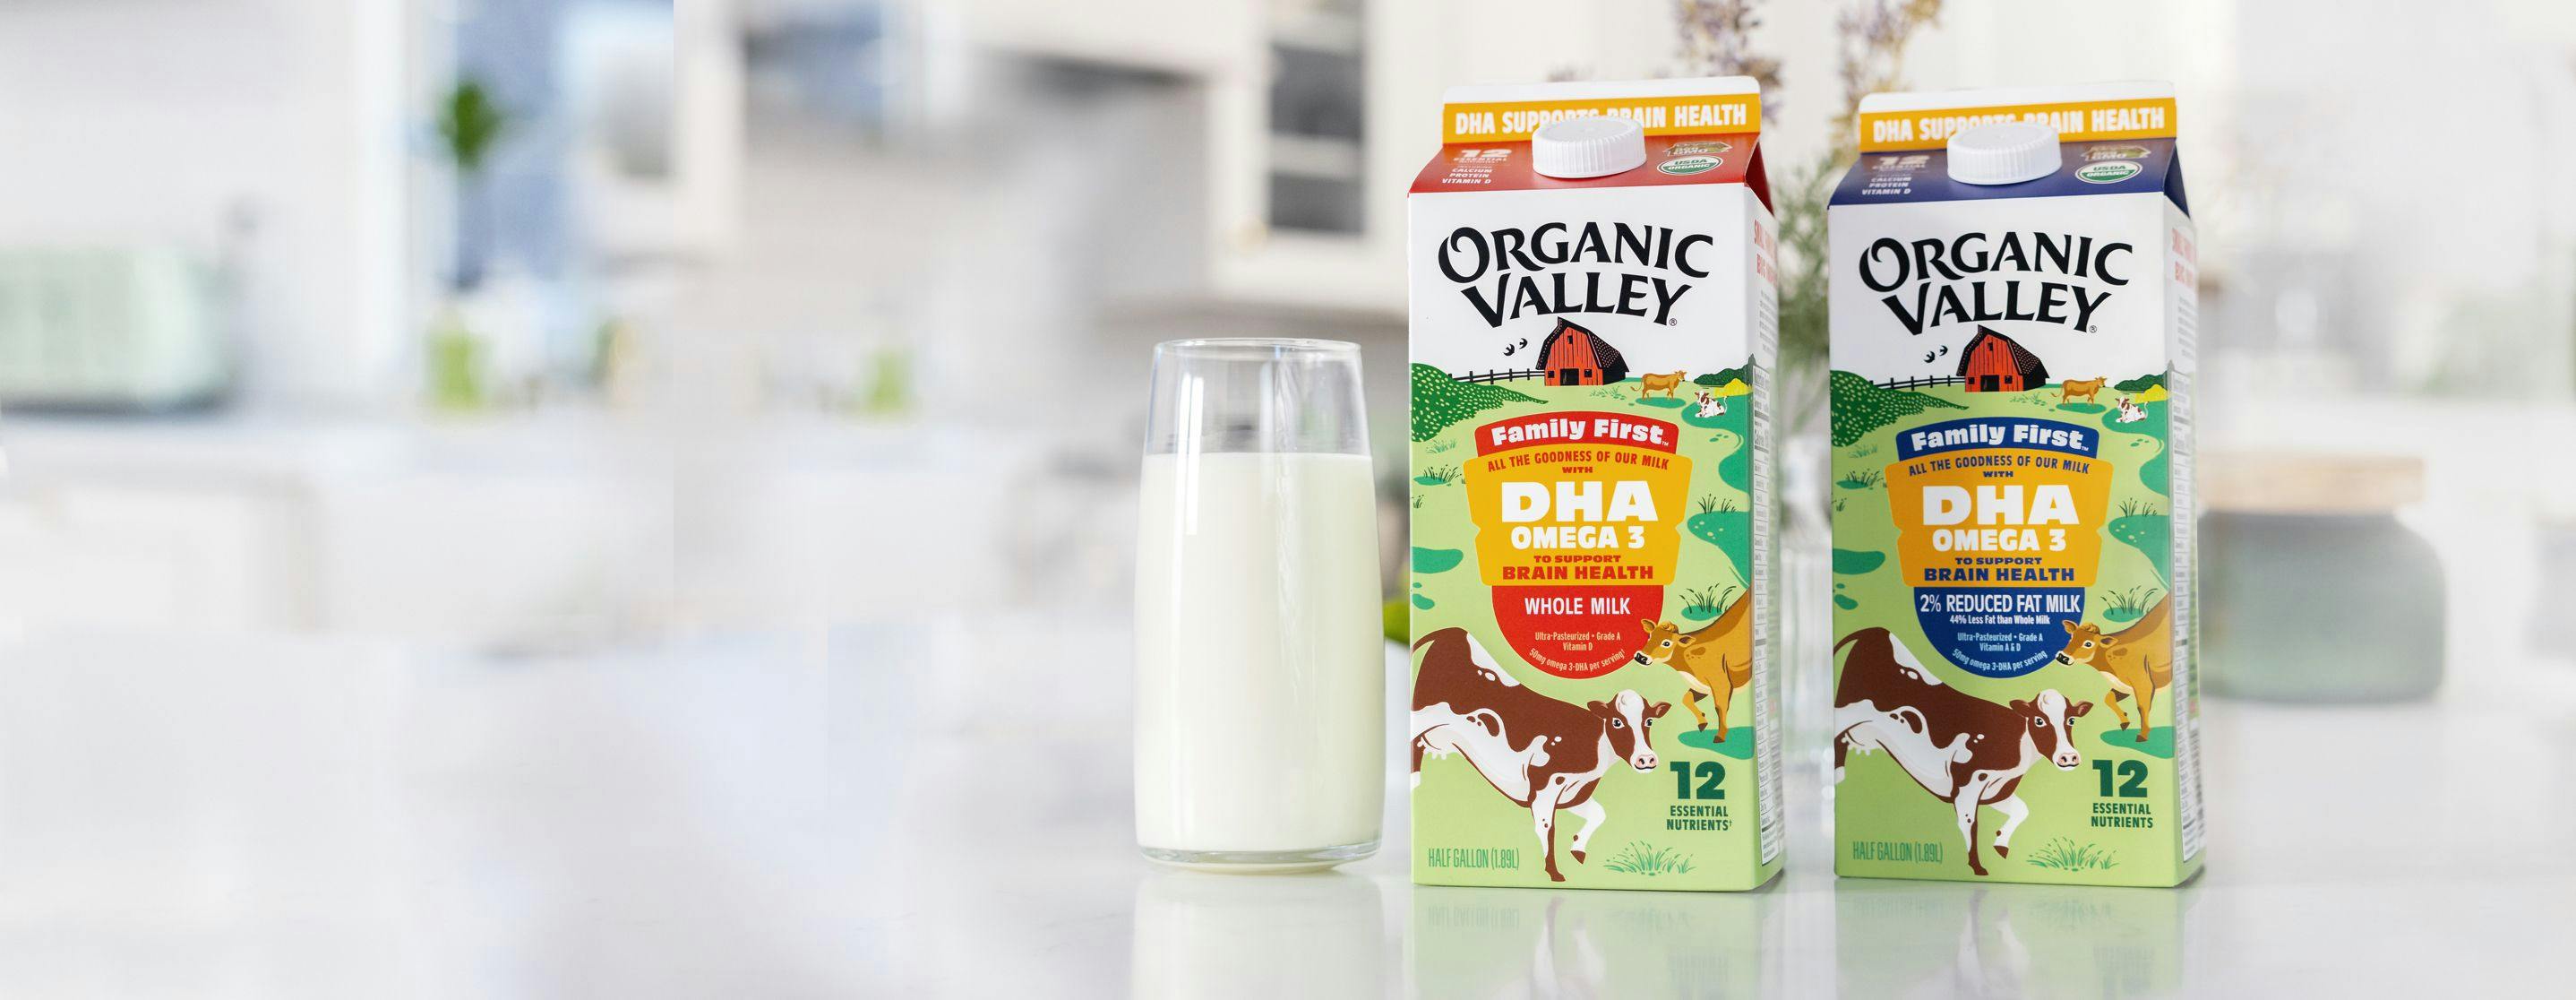 Organic Valley Family First DHA Omega 3 Milk on a table.